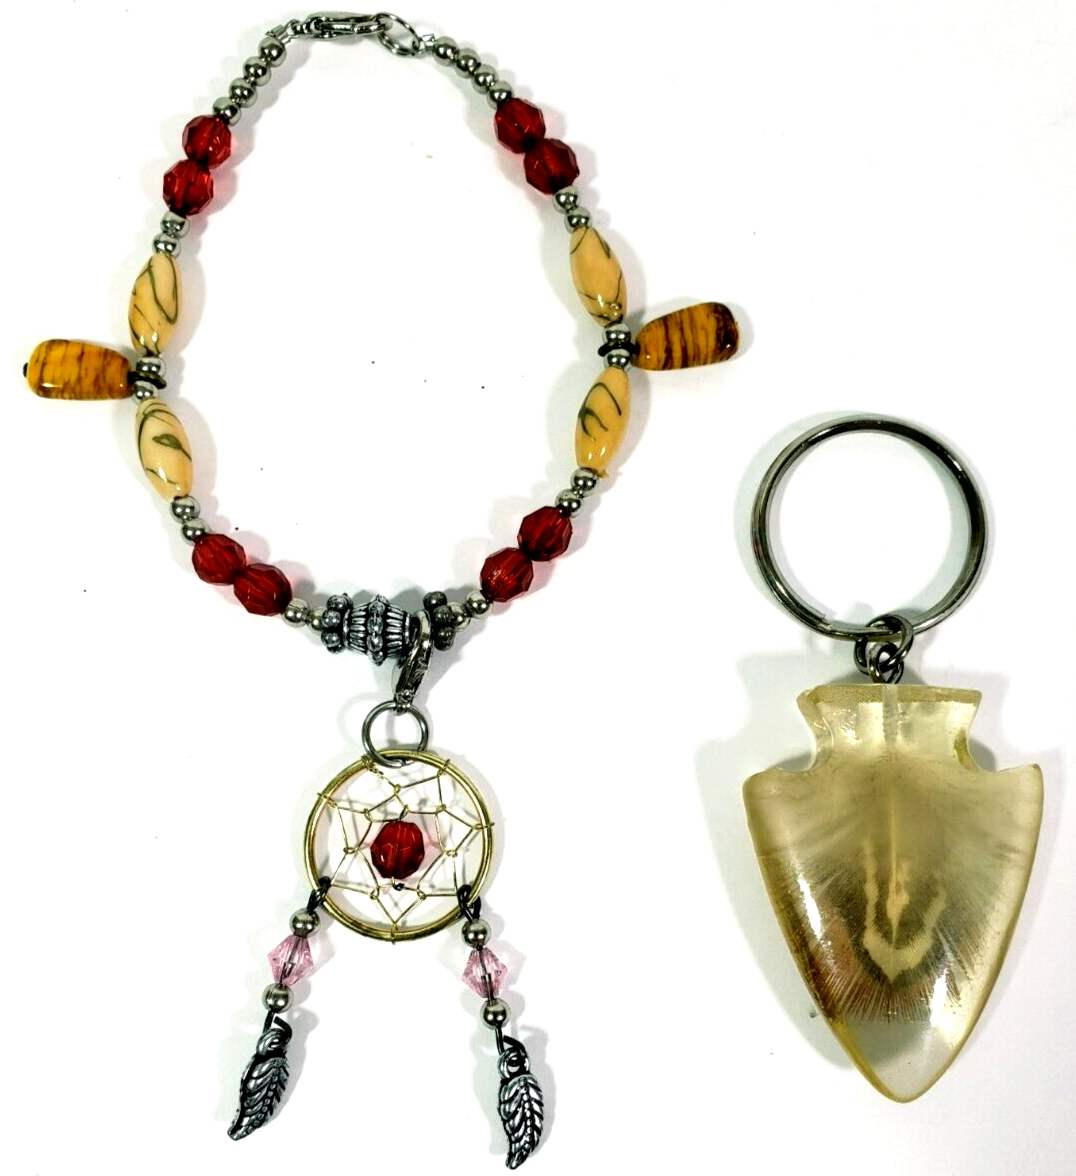 Primary image for Gold and Red Dreamcatcher Bracelet and Arrowhead Keychain NWOT